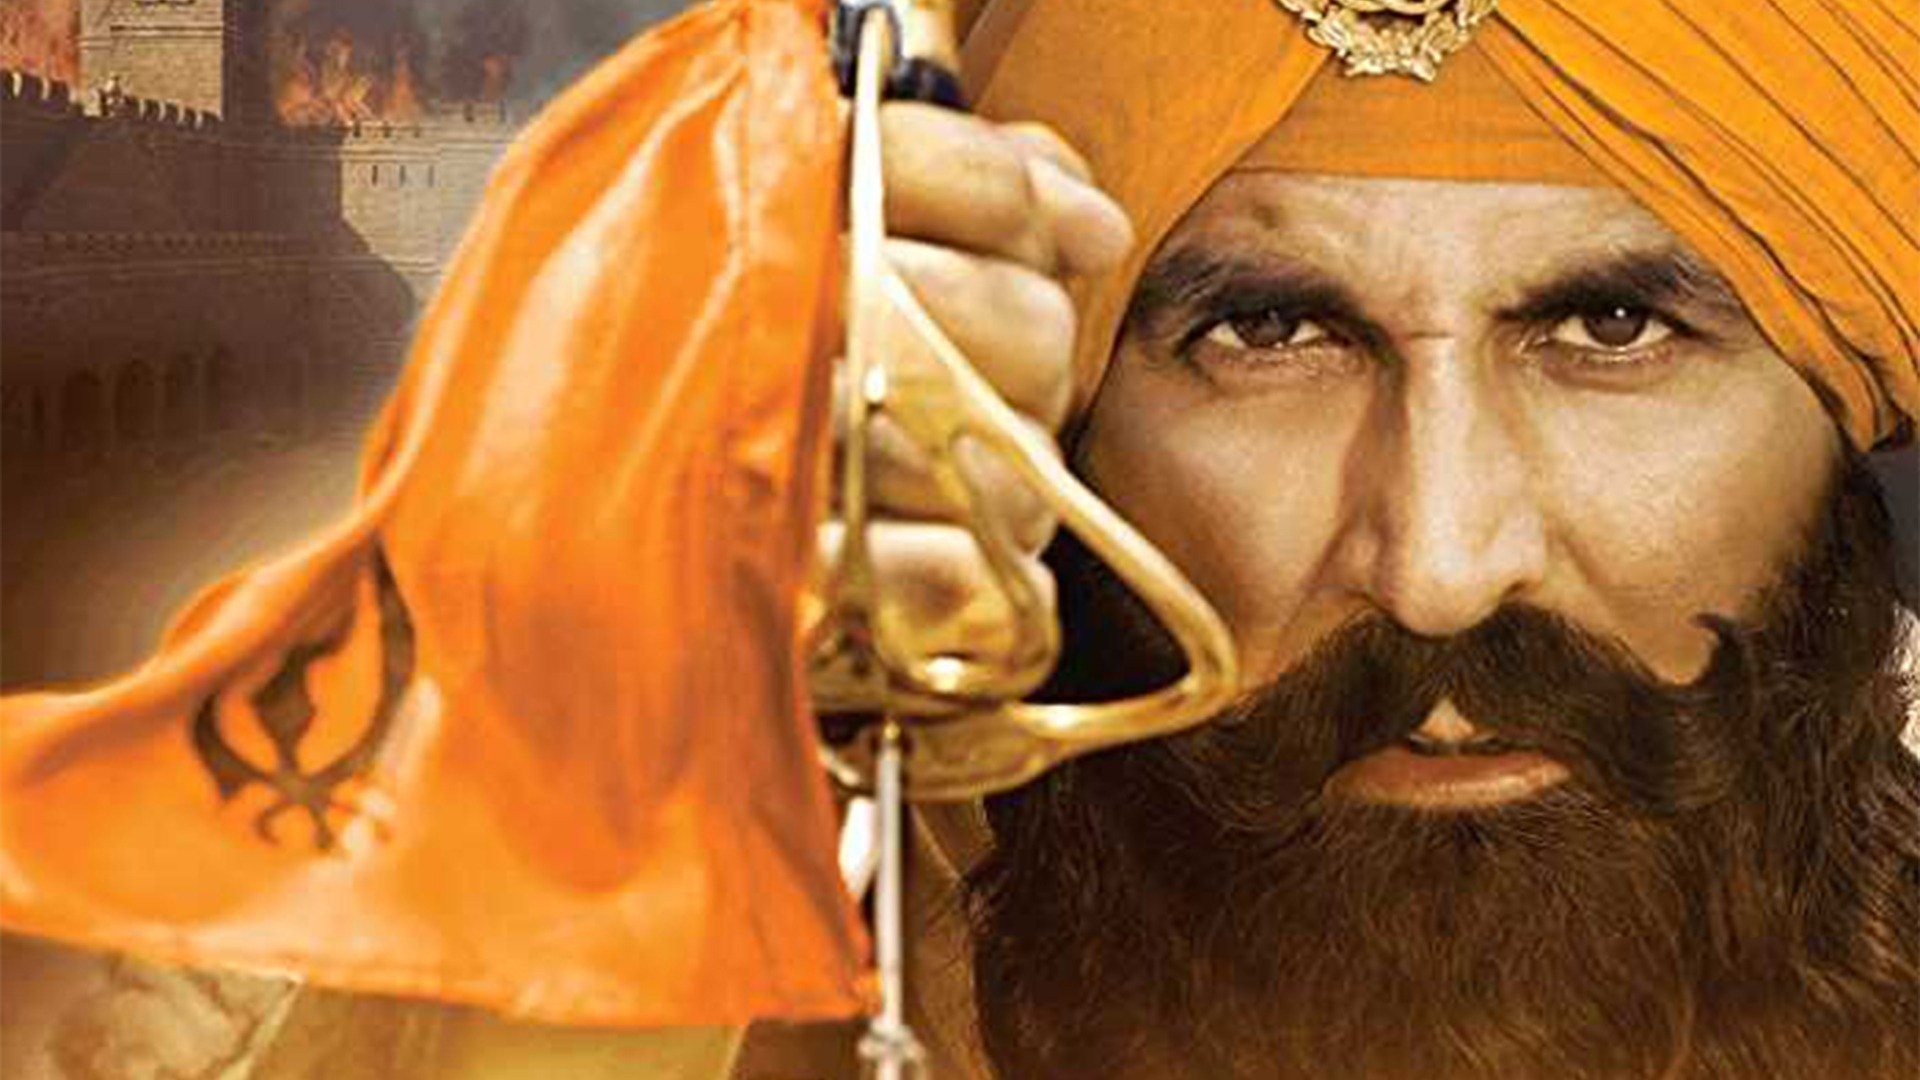 Paytm Entertainment - #Kesari gets the biggest opening of the year! Watch  it in cinemas now, book your tickets on Paytm. http://m.p-y.tm/kesri Dharma  Productions | Facebook